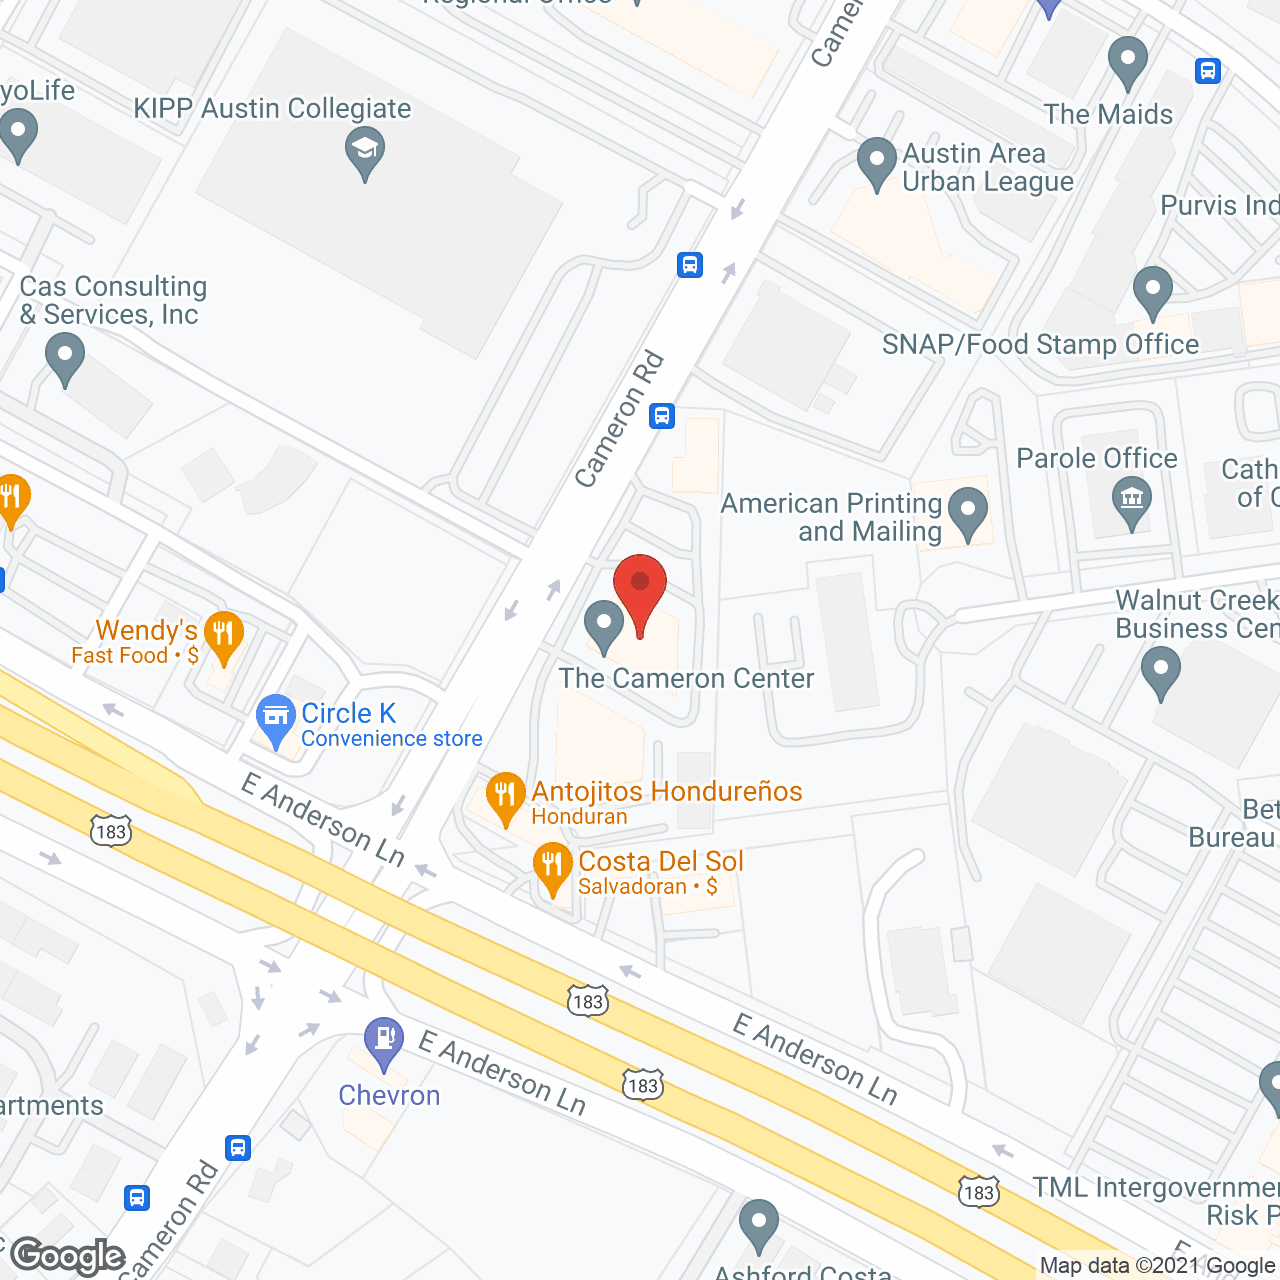 Charlie's Angels Home Care Assistants, LLC in google map